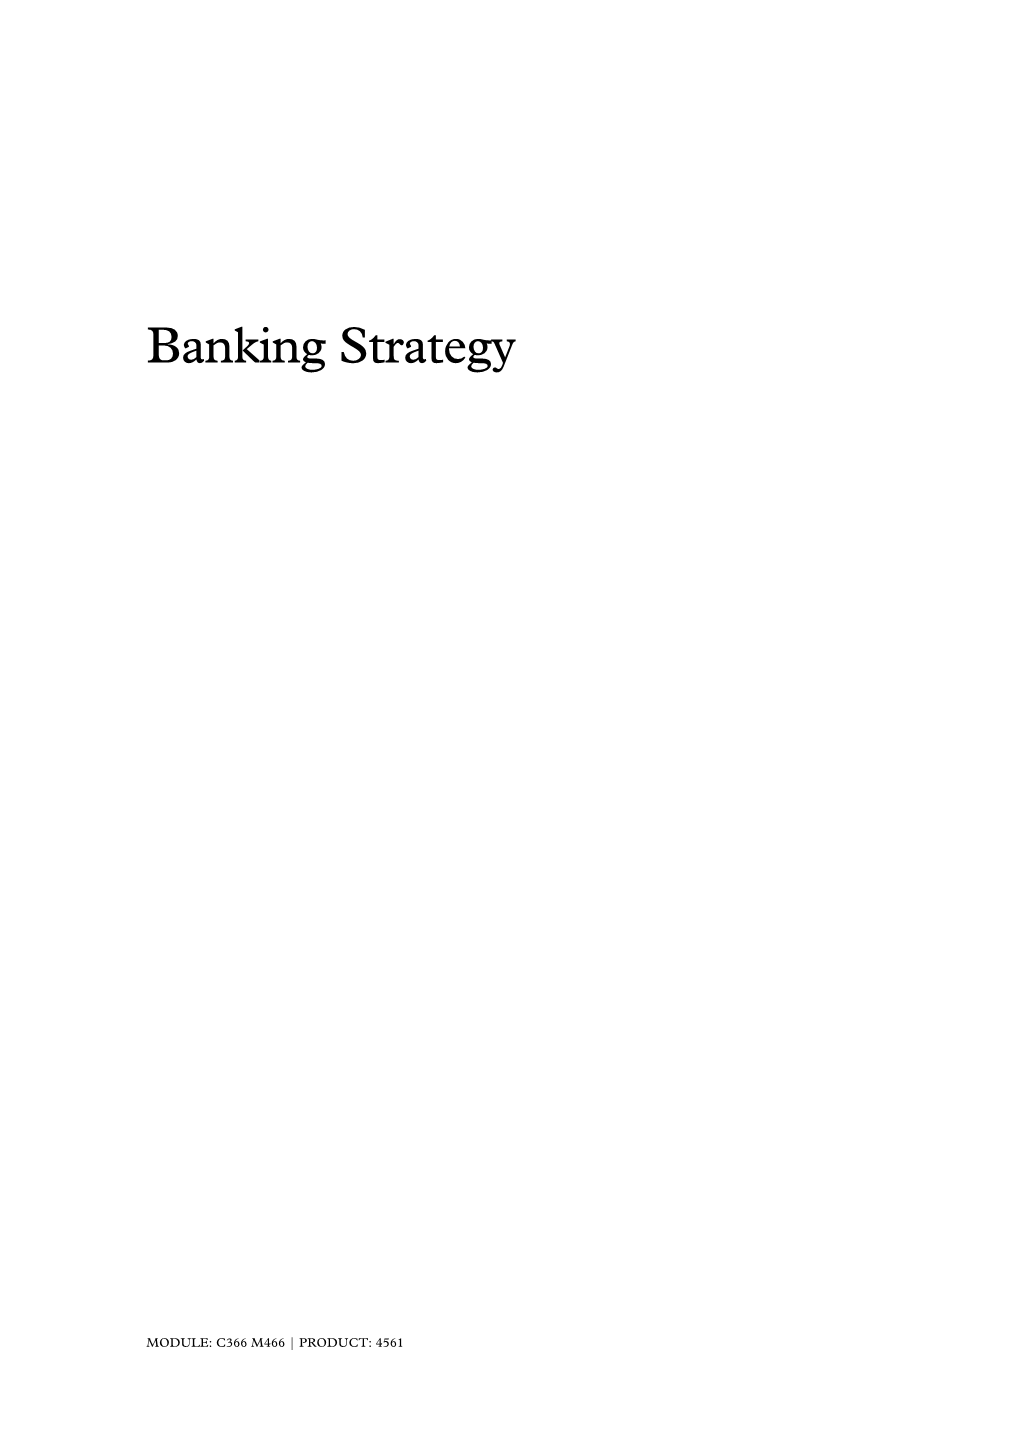 Banking Strategy